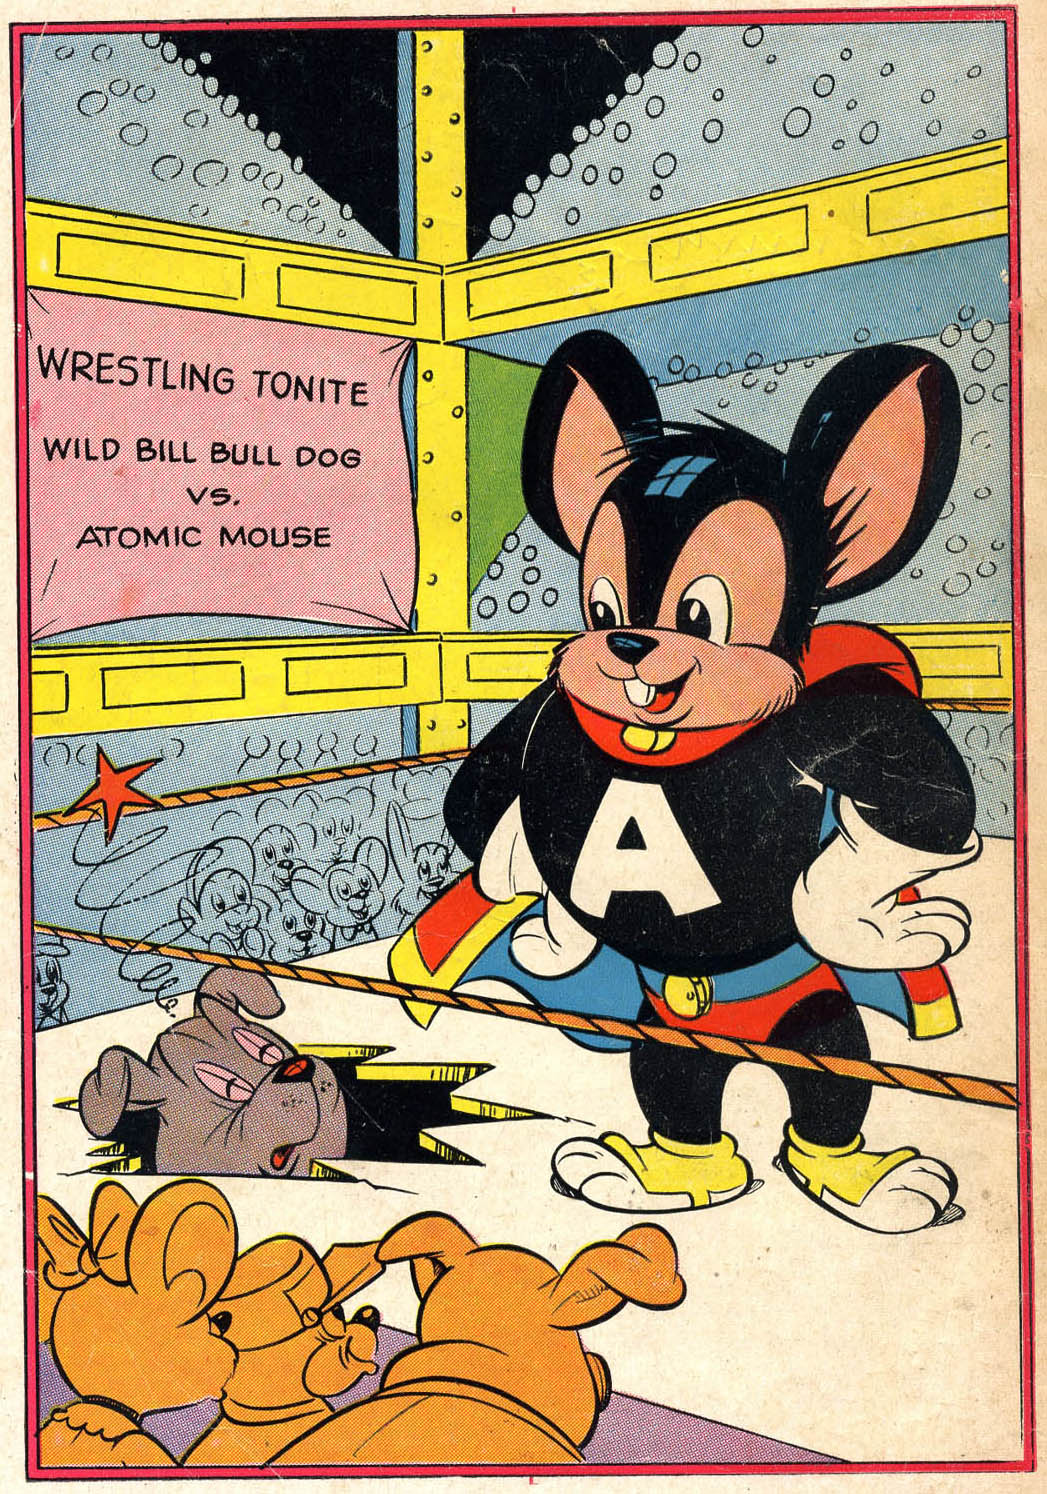 [AtomicMouse.jpg]